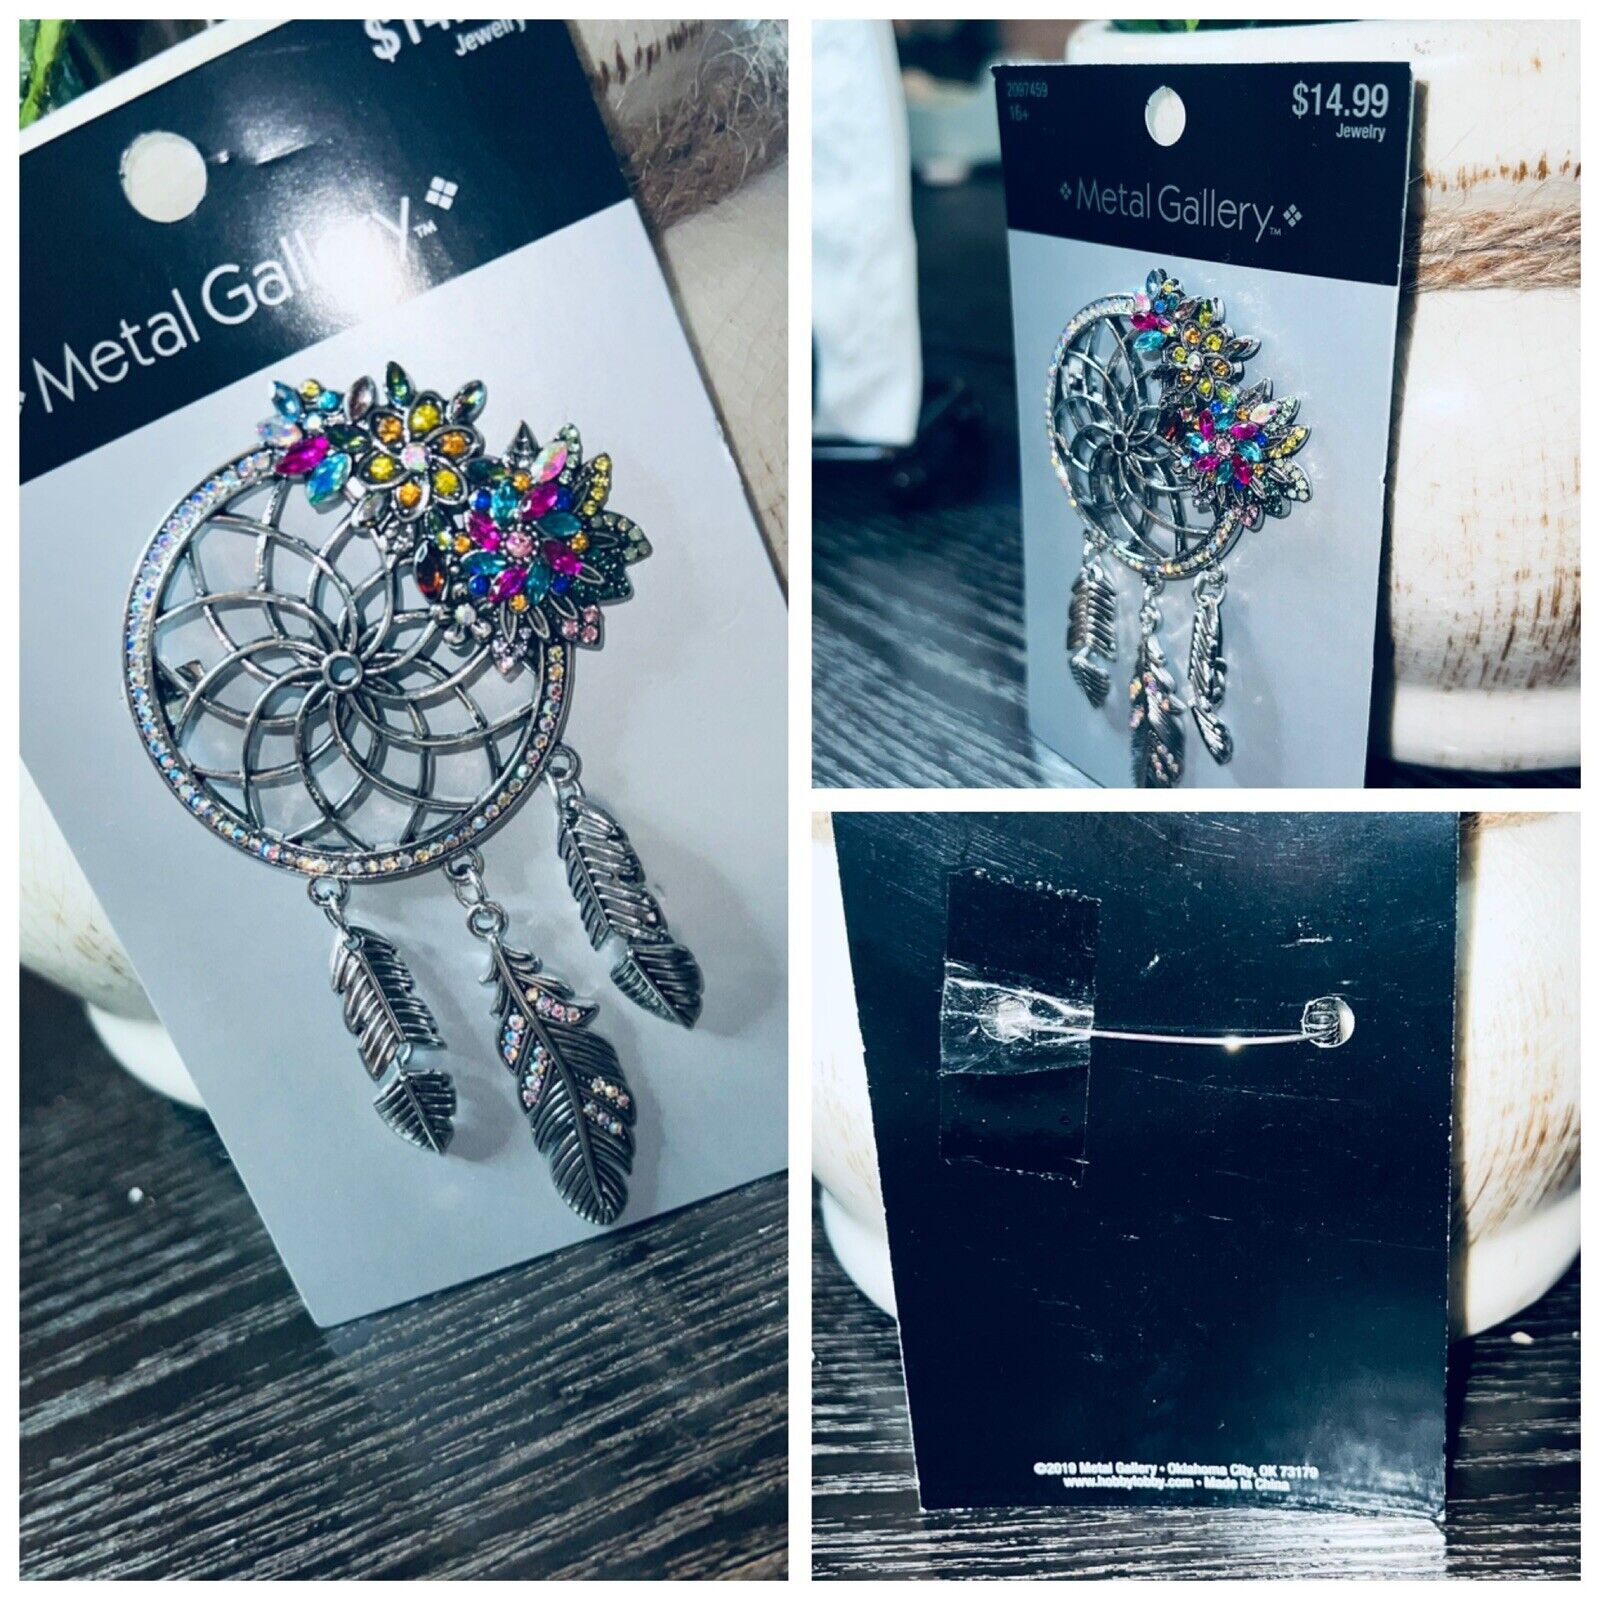 🕸Metal Gallery Colorful Dream Catcher 4” Metal Brooch [Brand New]🕸